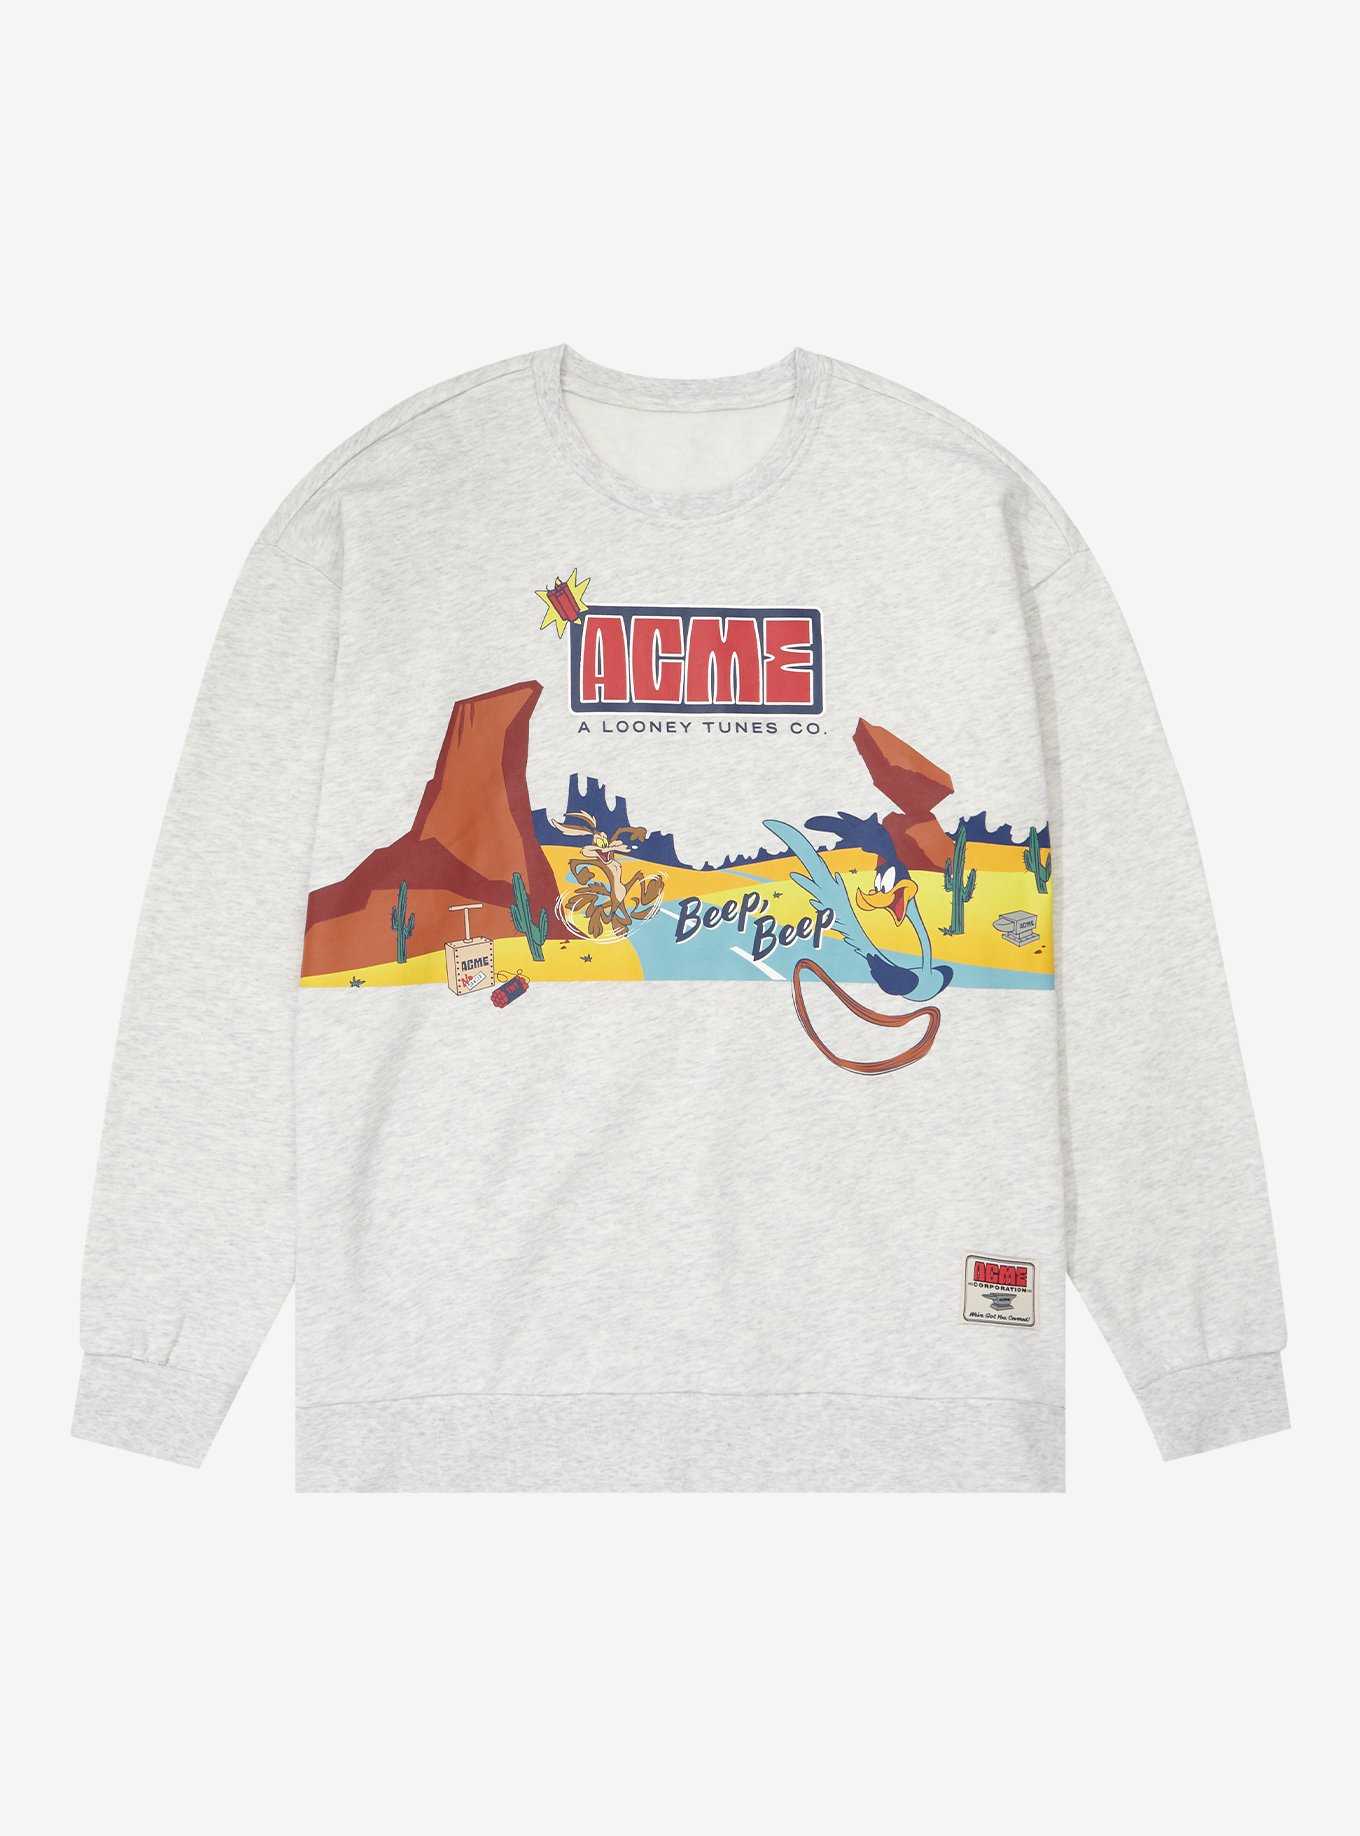 Looney Tunes ACME Wile. E Coyote & Road Runner Crewneck - BoxLunch Exclusive, , hi-res